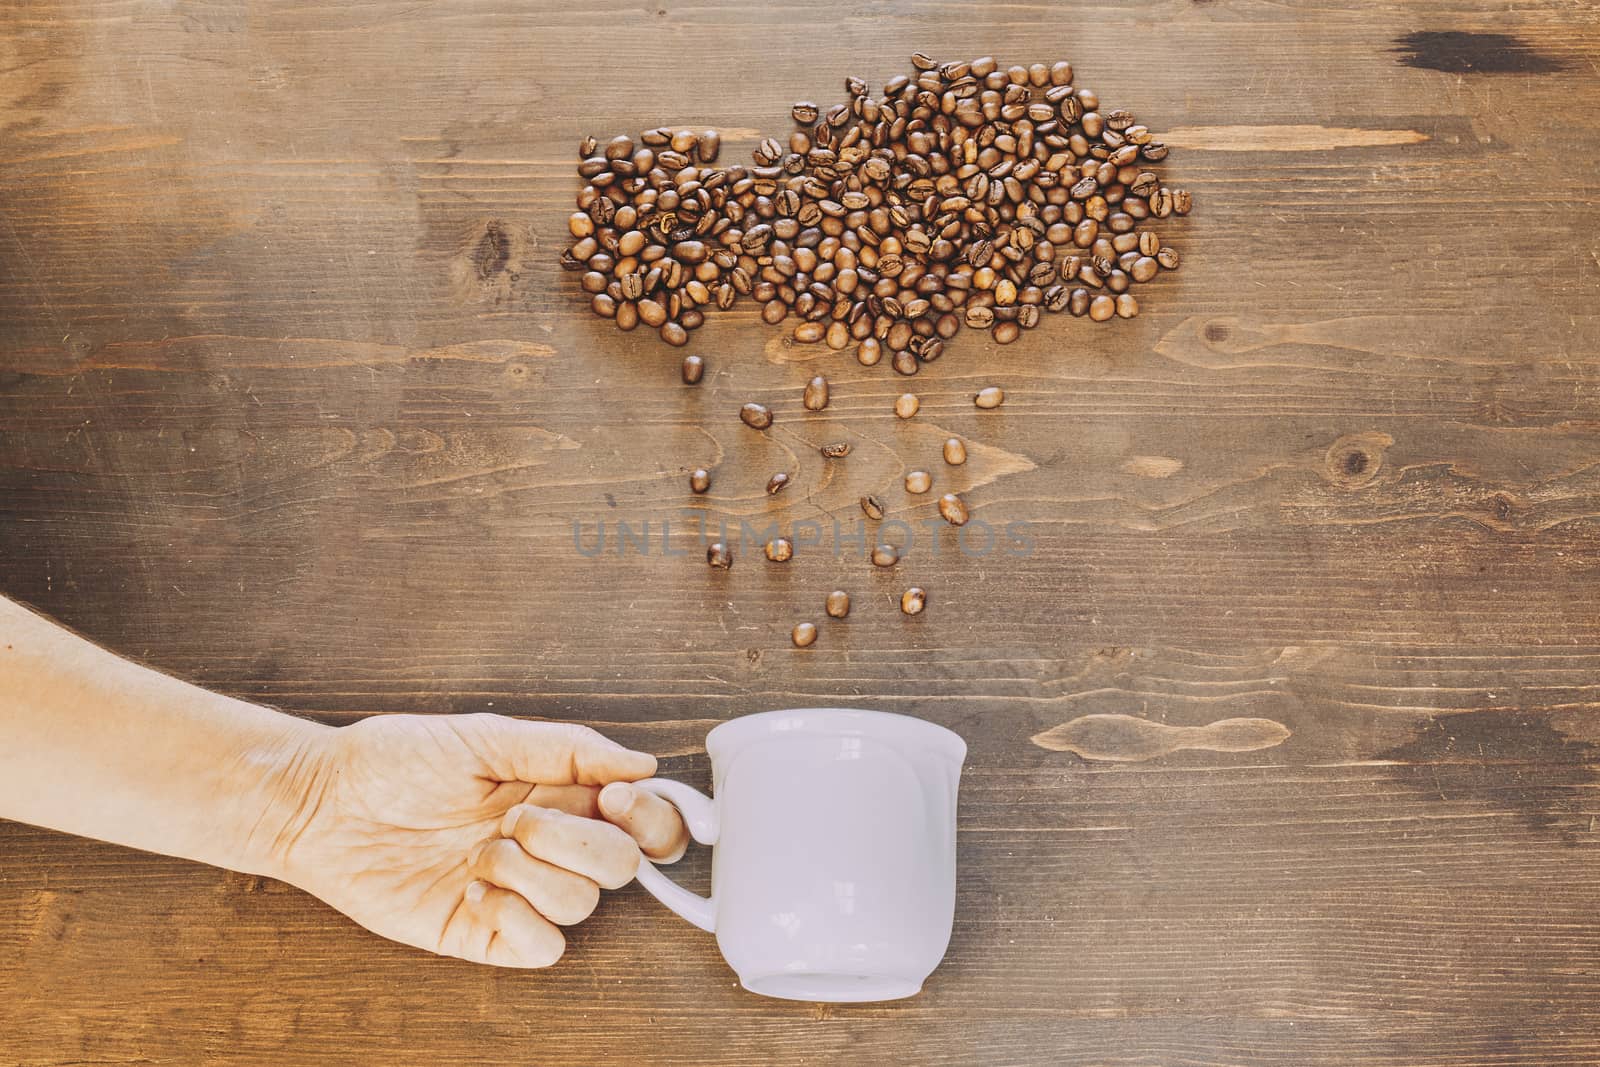 Rain of coffee beans in a white cup by Daniel_Mato